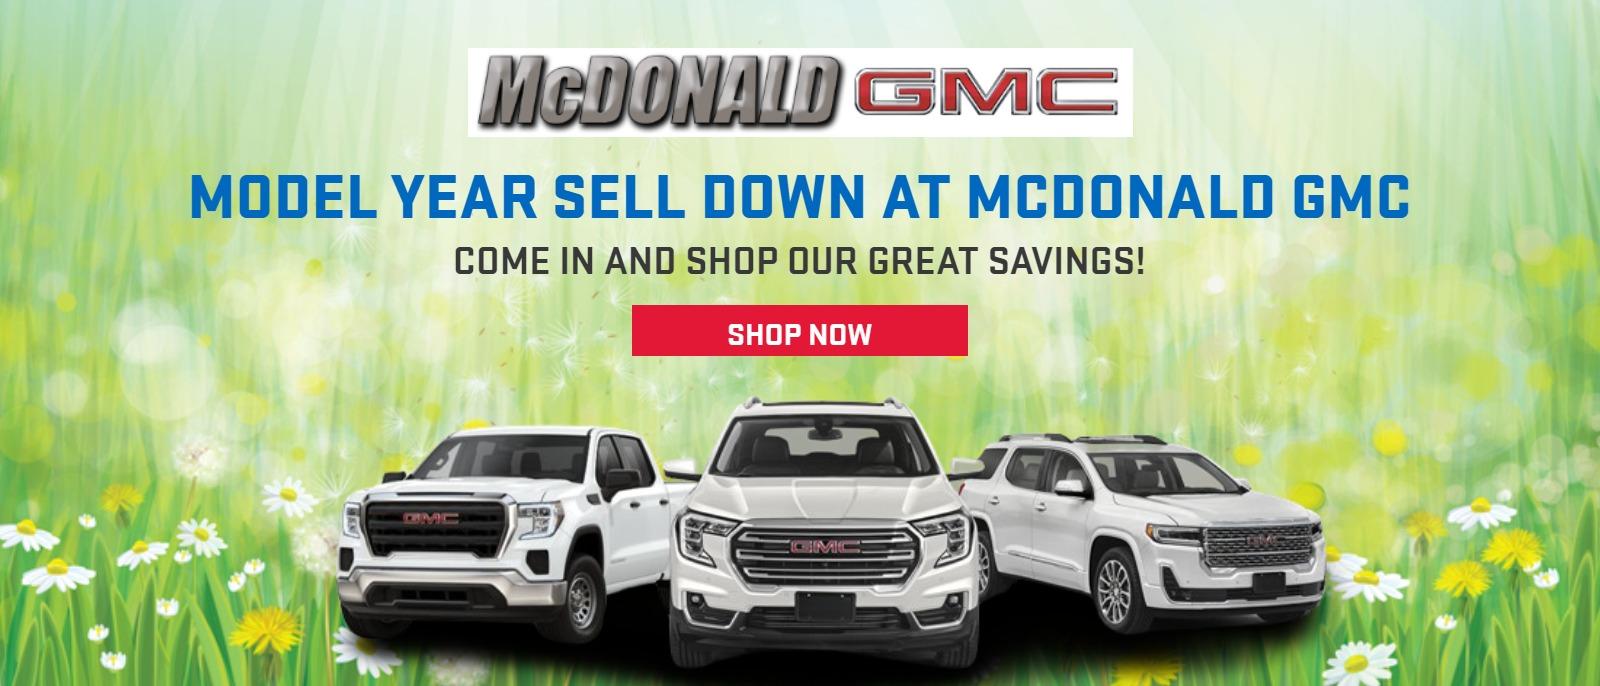 Model year Sell Down at MCDONALD GMC
Come in and shop our great savings!